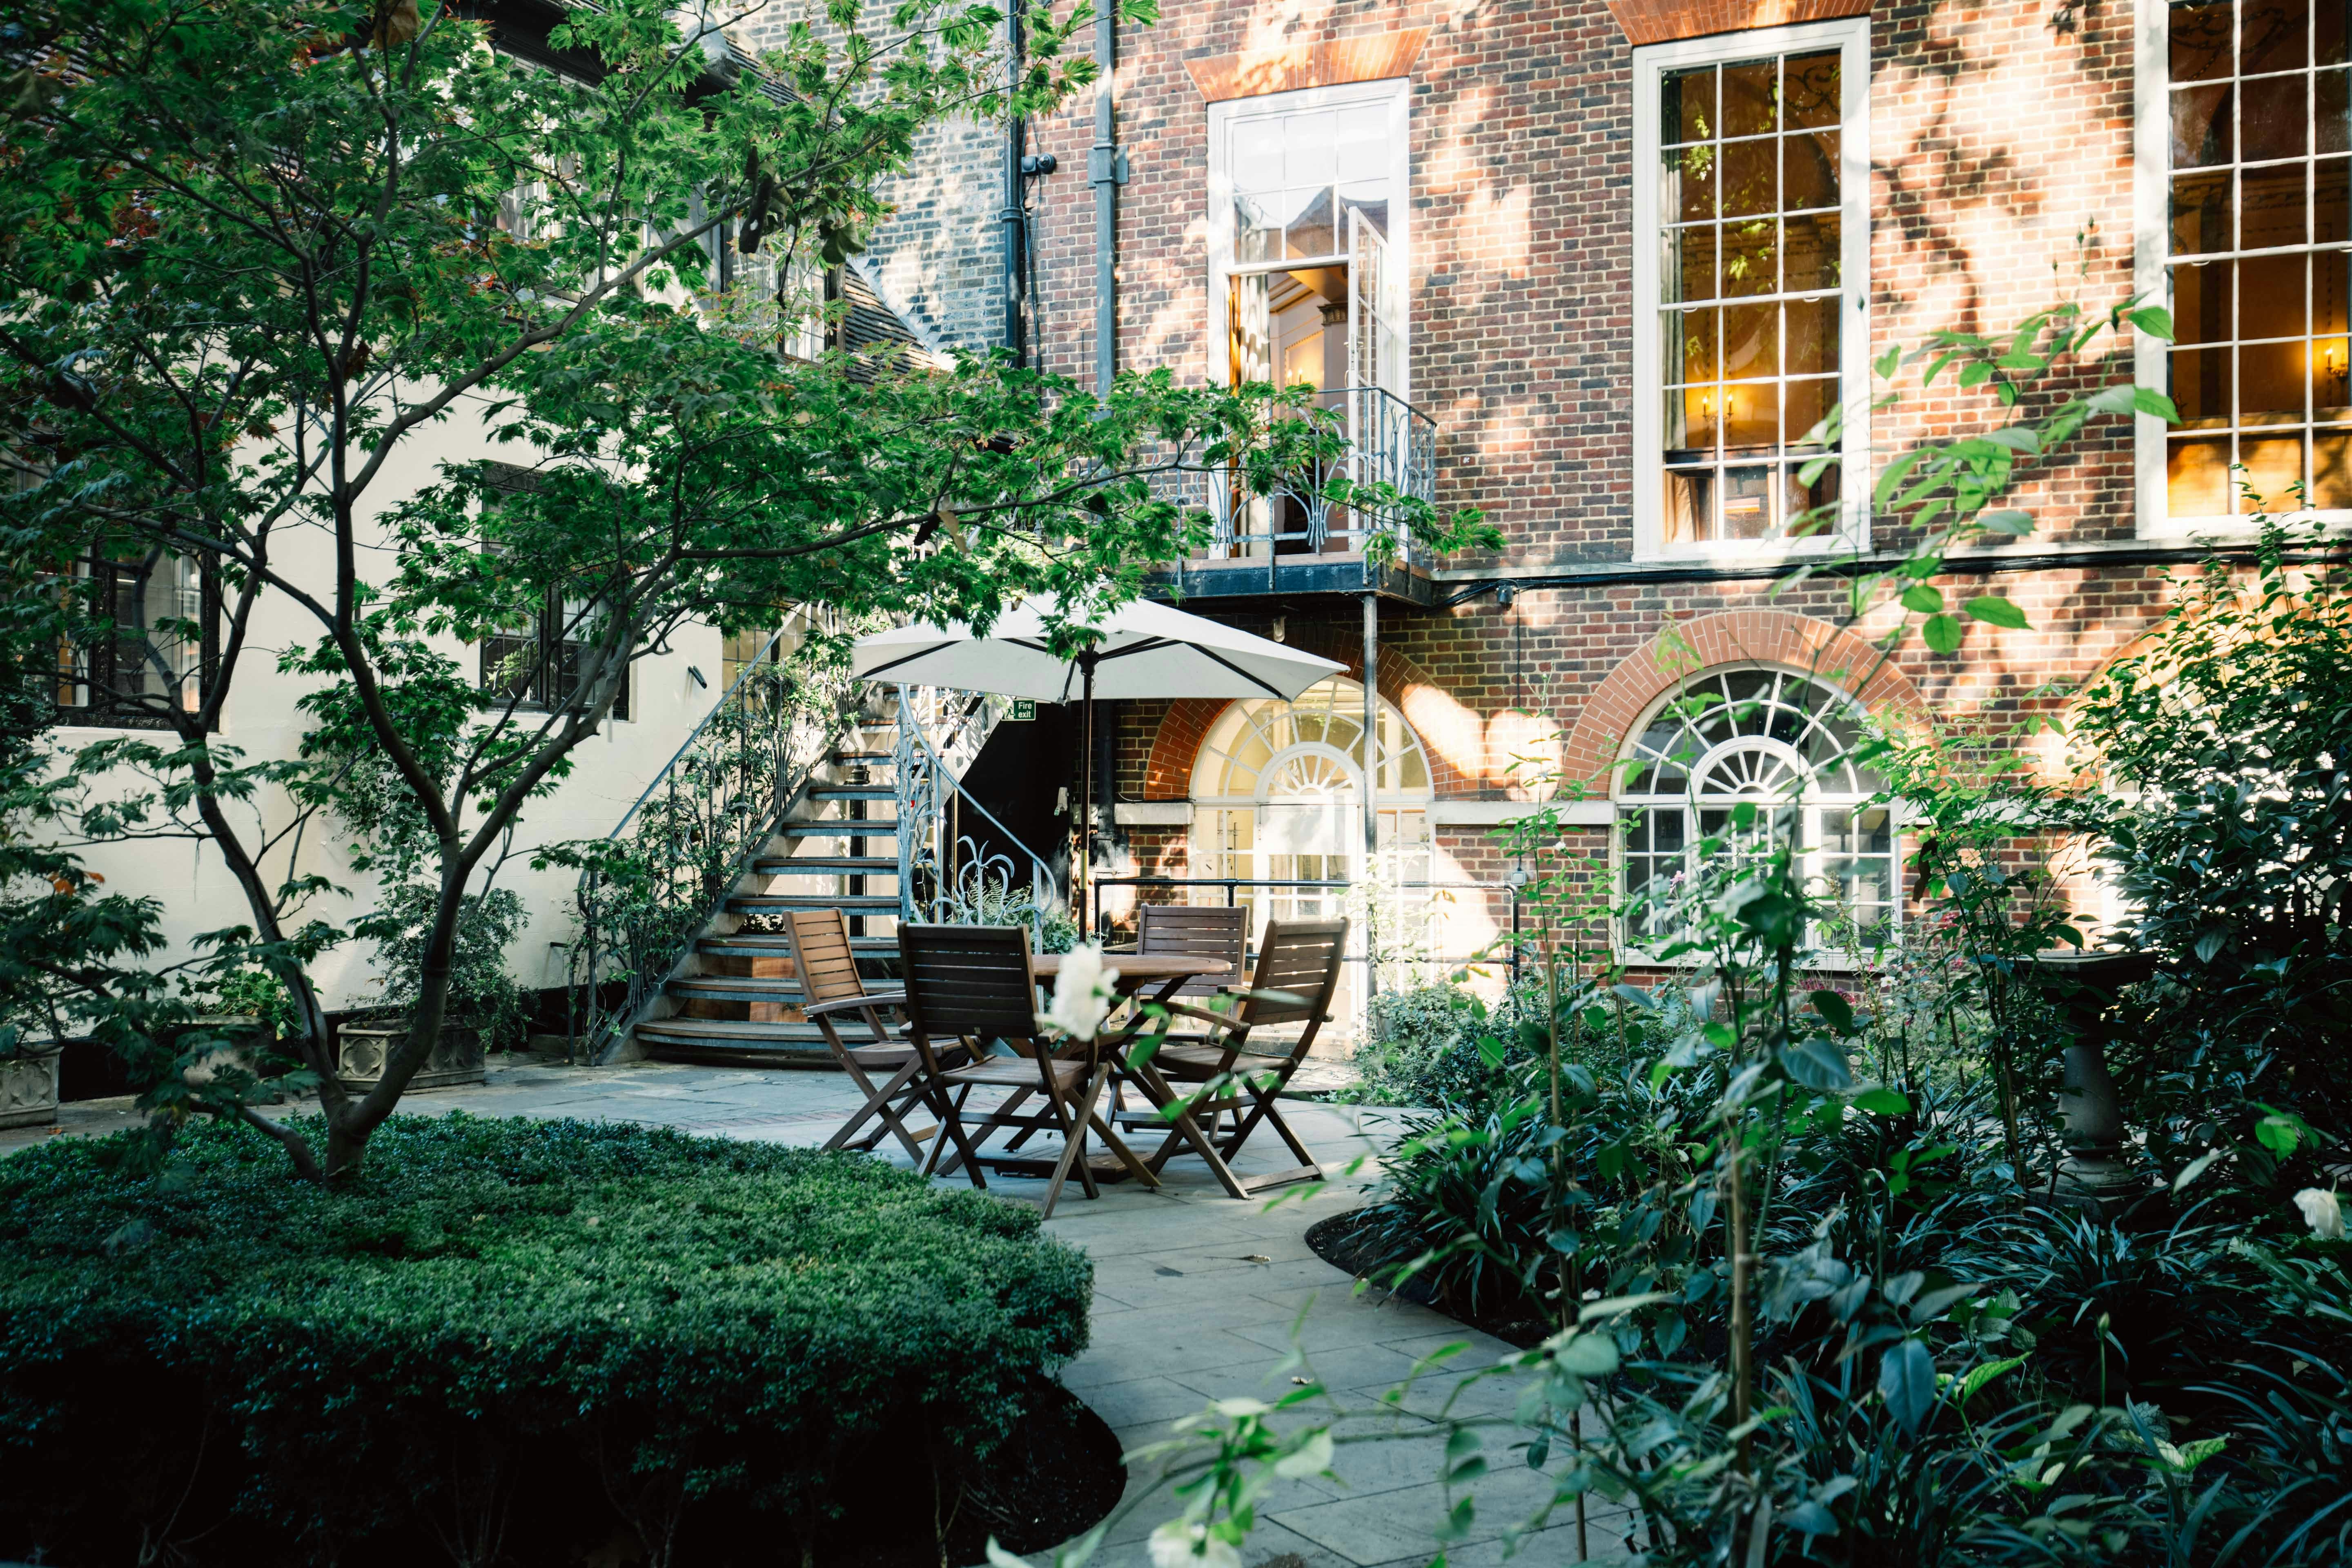 Engagement Party Venues in Central London - Stationers' Hall and Garden